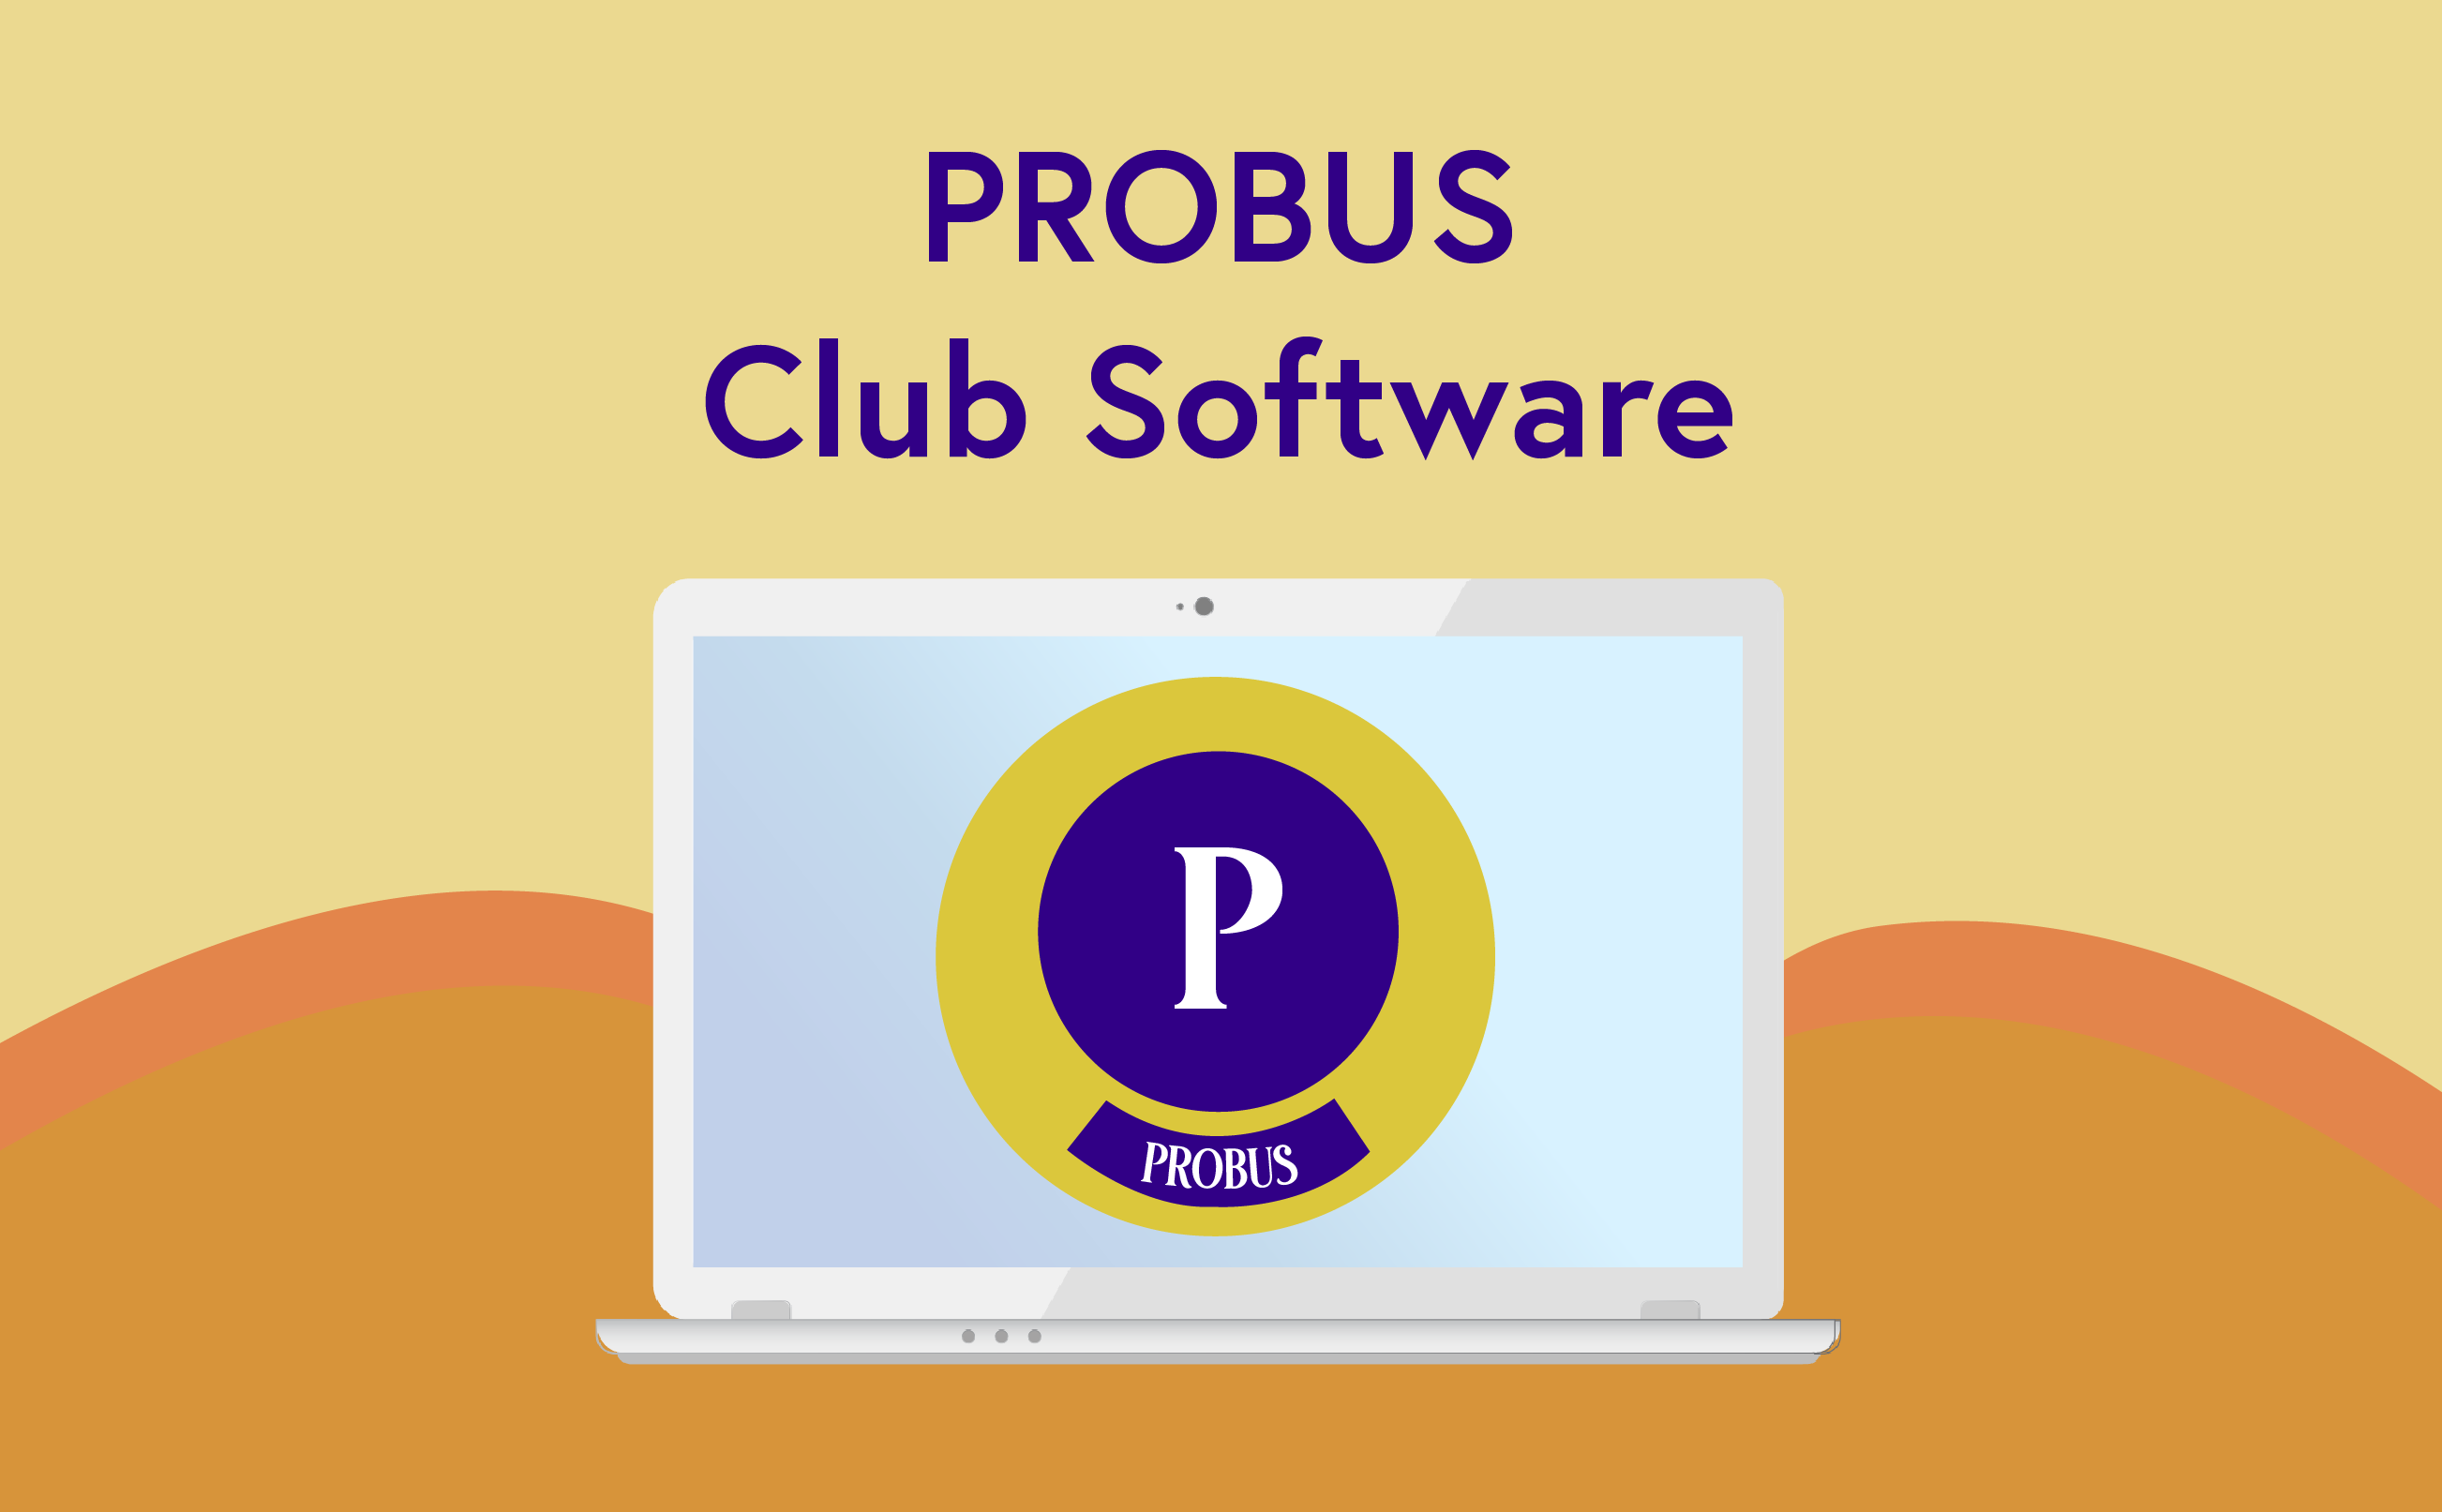 How The #1 PROBUS Club Software Can Save You Time and Money